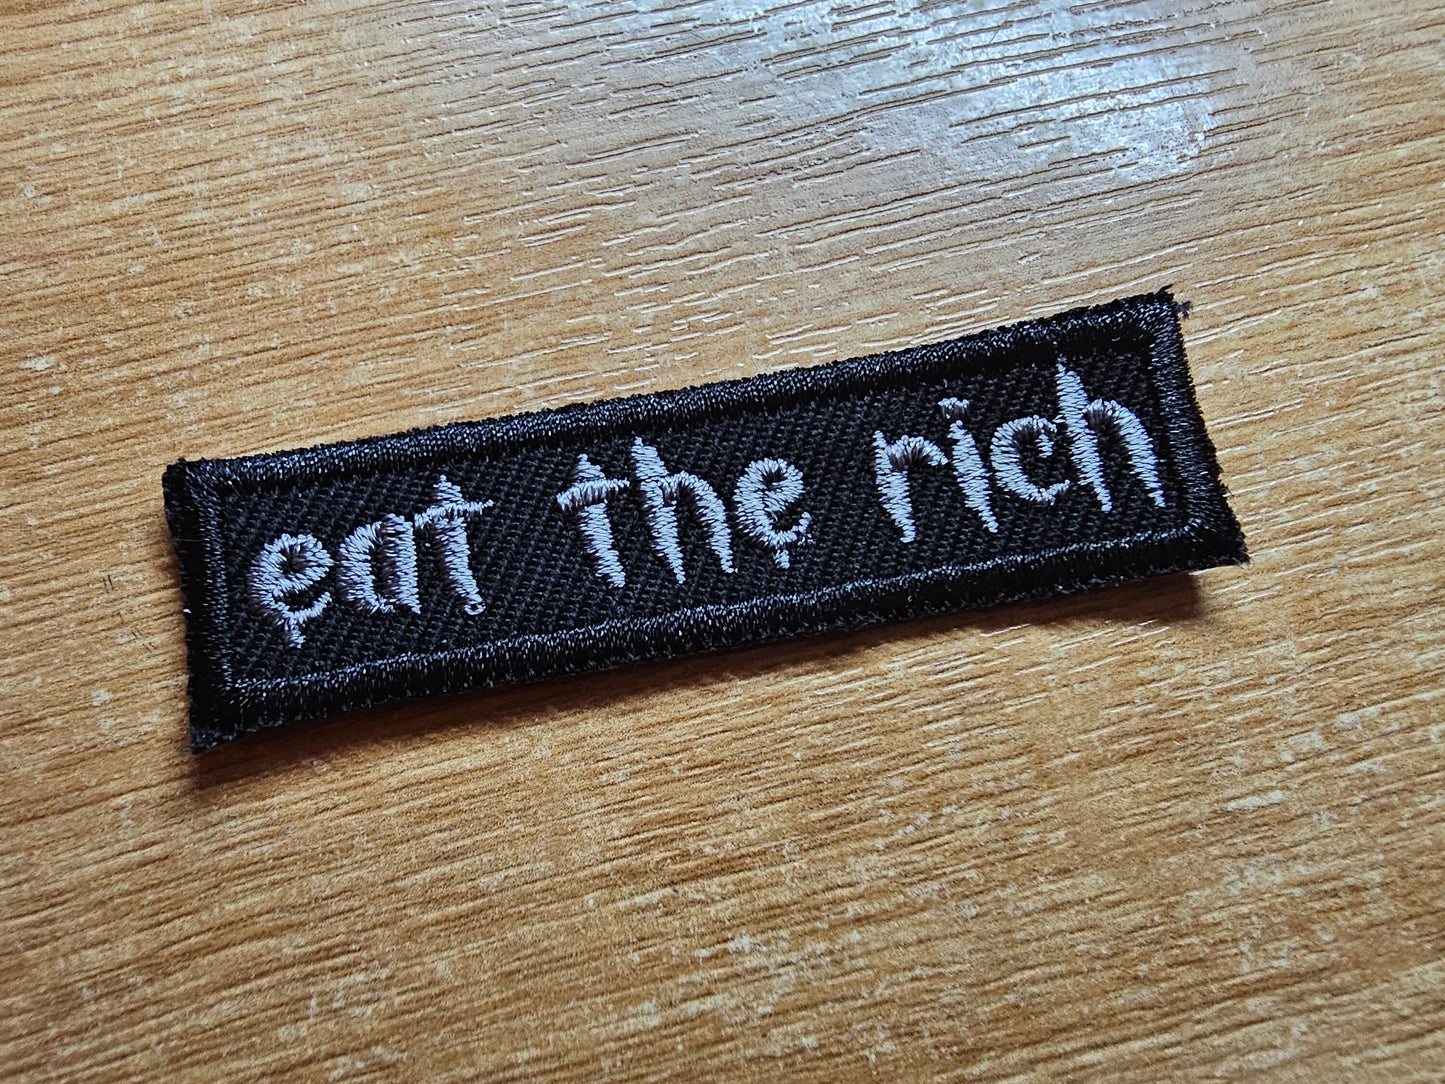 Eat The Rich MINI Embroidered Iron On Patch Politics Punk and Goth - Very small! Grey and Black